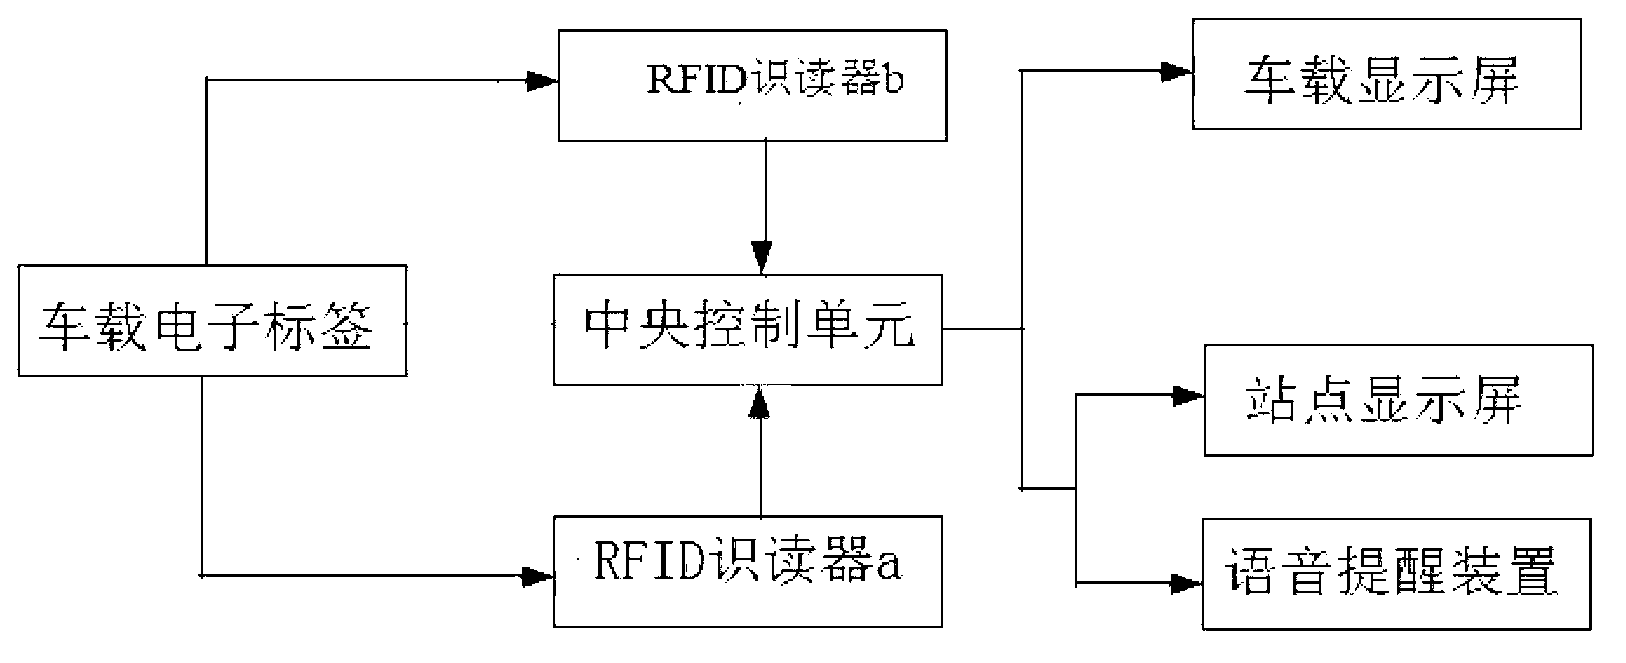 RFID-based (radio frequency identification-based) bus arrival coordination system